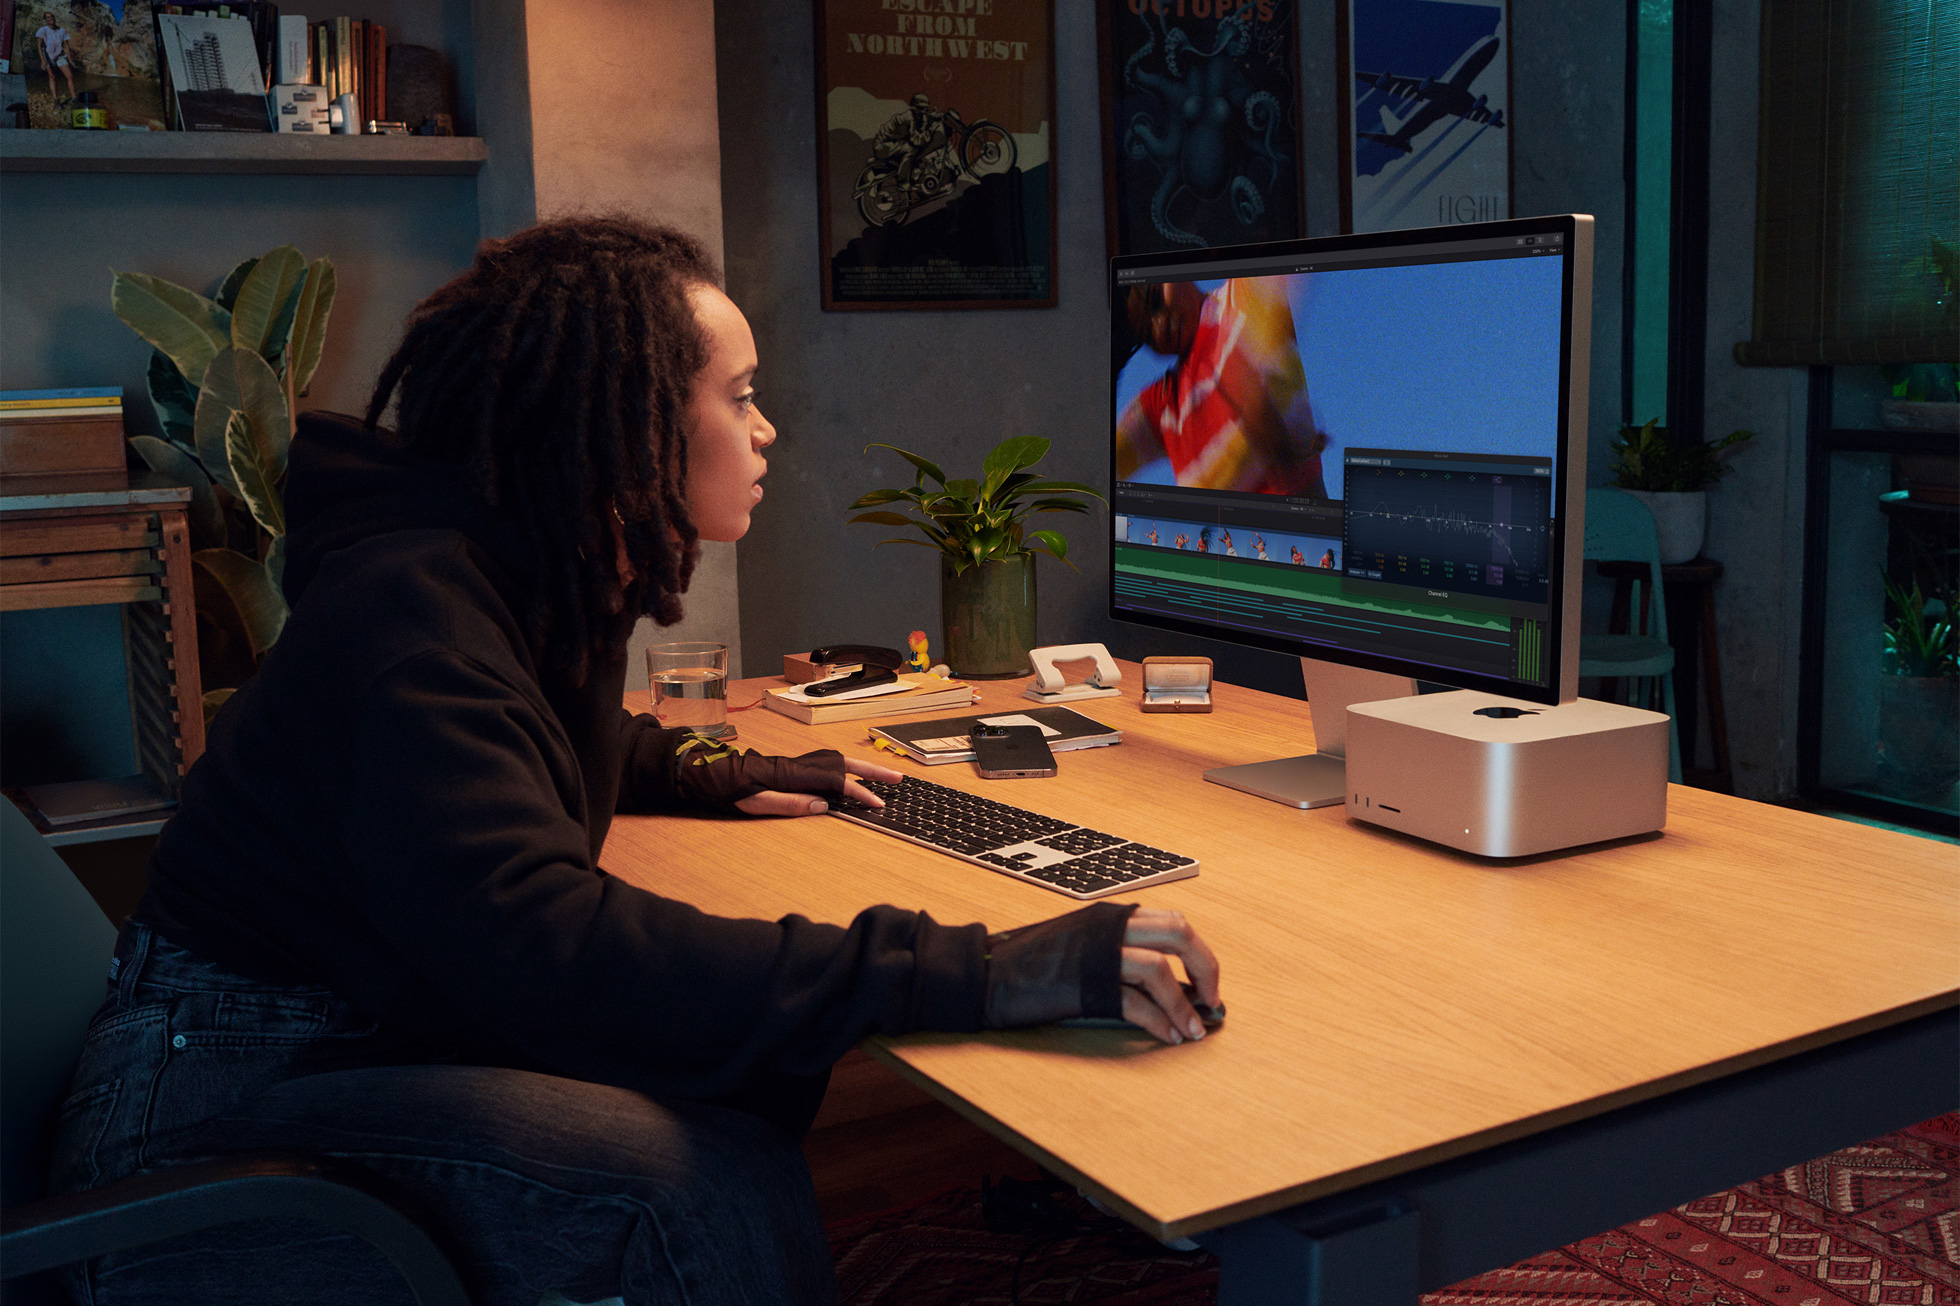 In this marketing image from Apple, a creative professional is depicted sitting at their desk and using a Mac Studio computer connected to a Studio Display